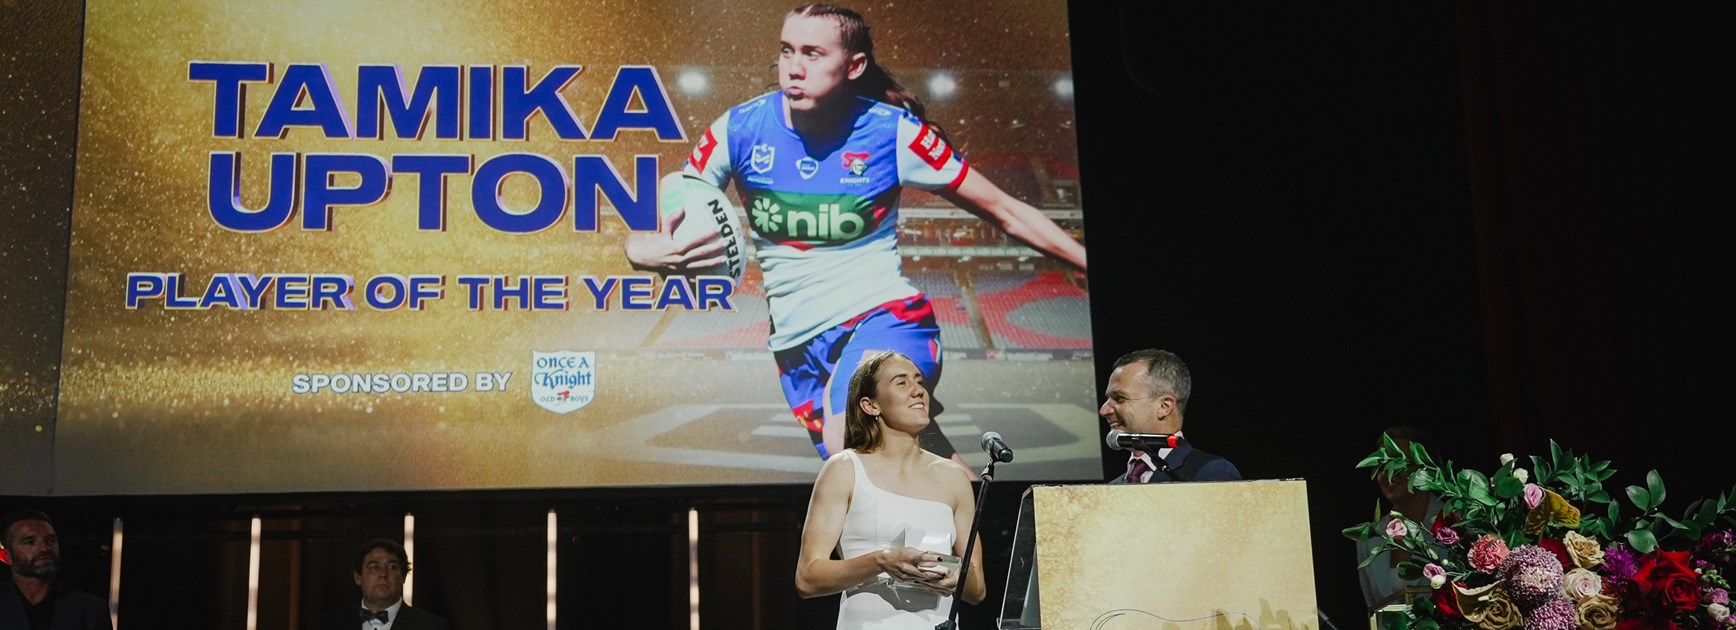 Upton named Knights NRLW Player of the Year